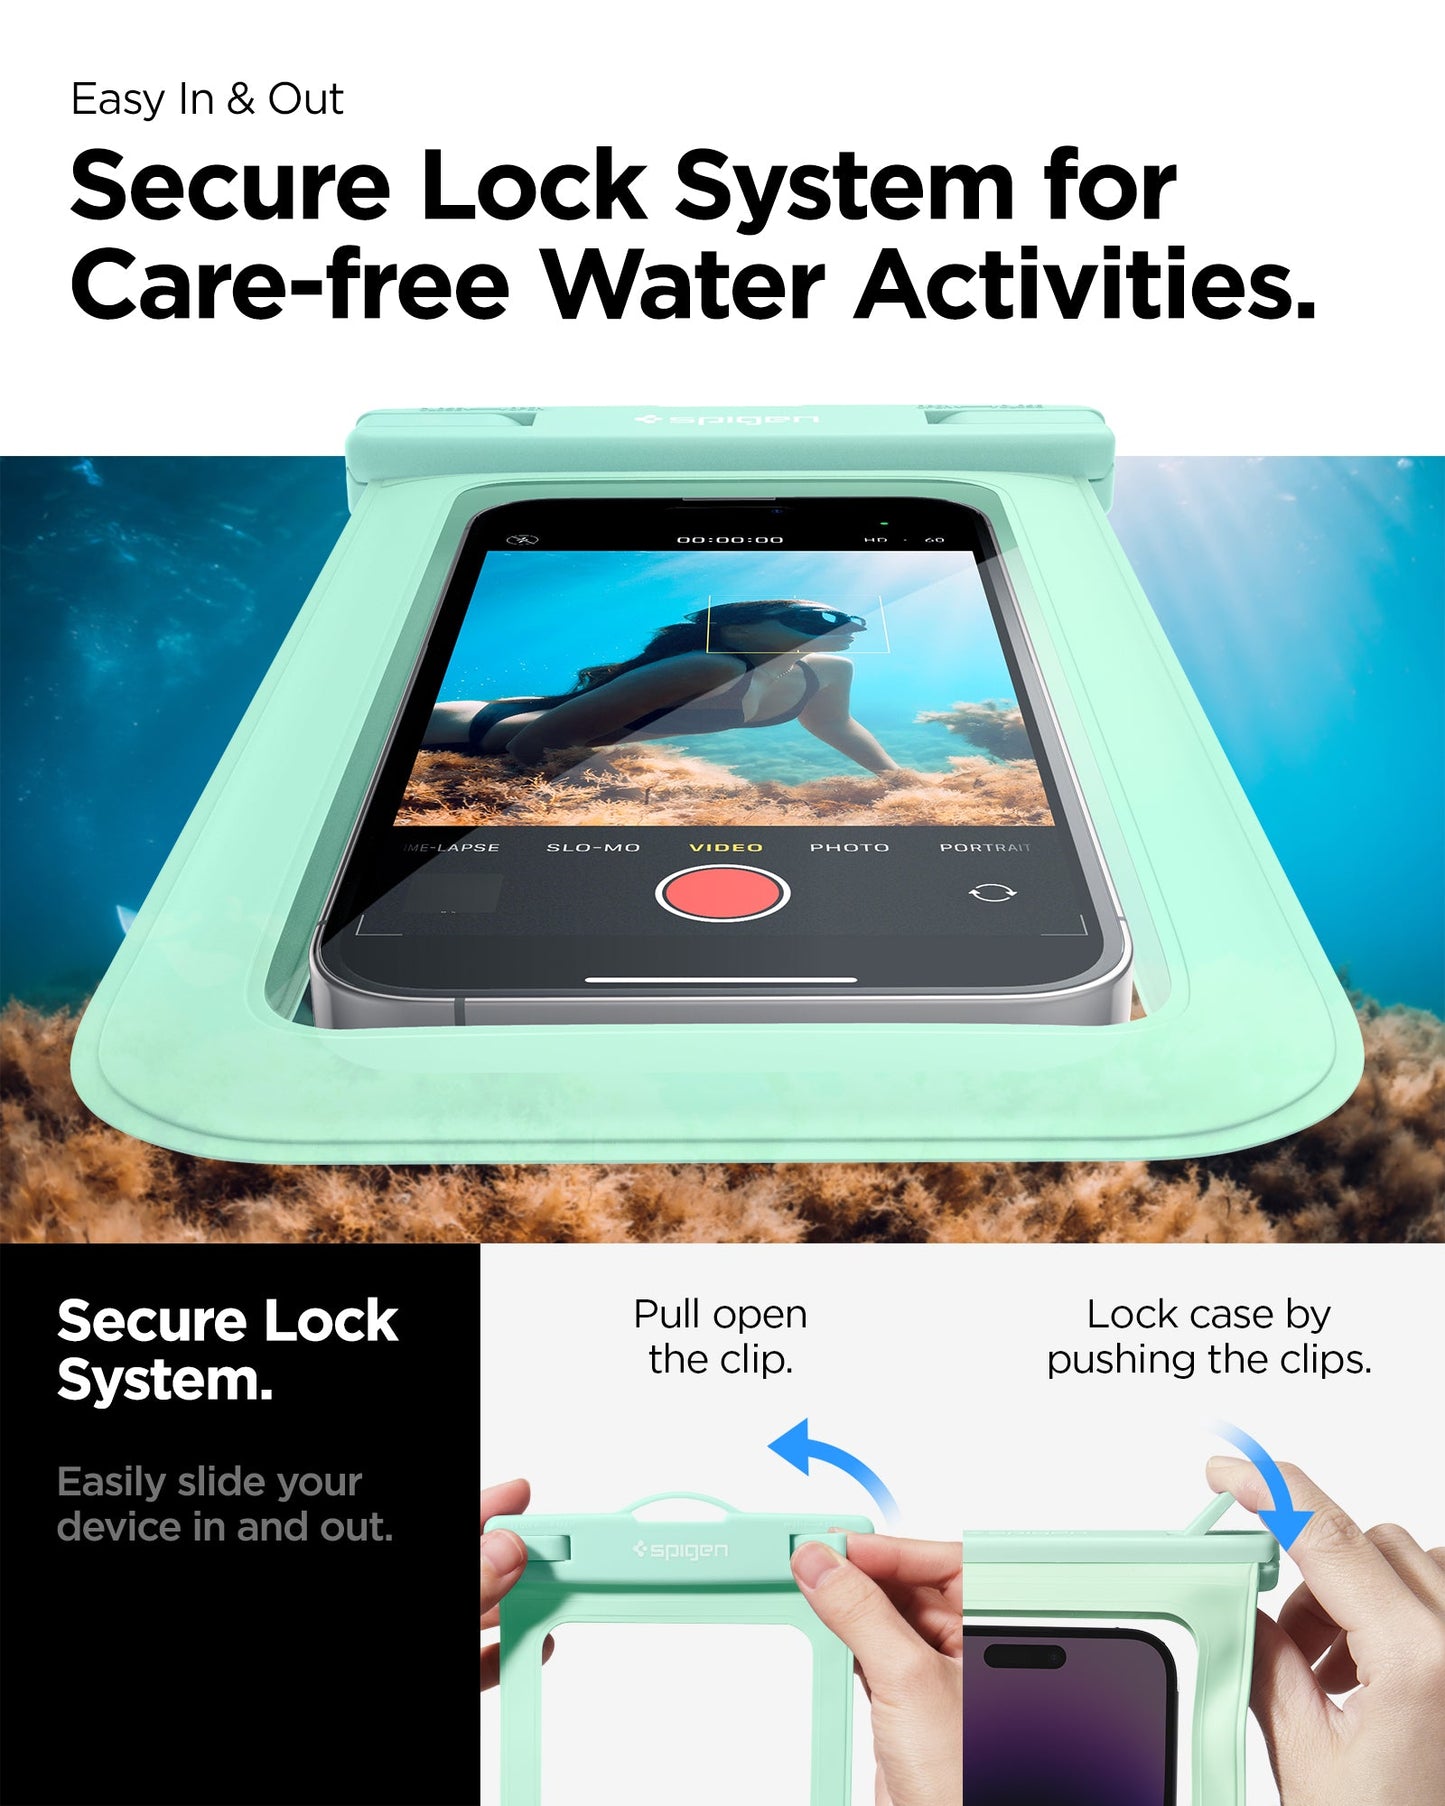 ACS06015 - AquaShield Waterproof Case (2 Pack) A601 in Mint showing the secure lock system for care-free water activities, easily slide your device in and out